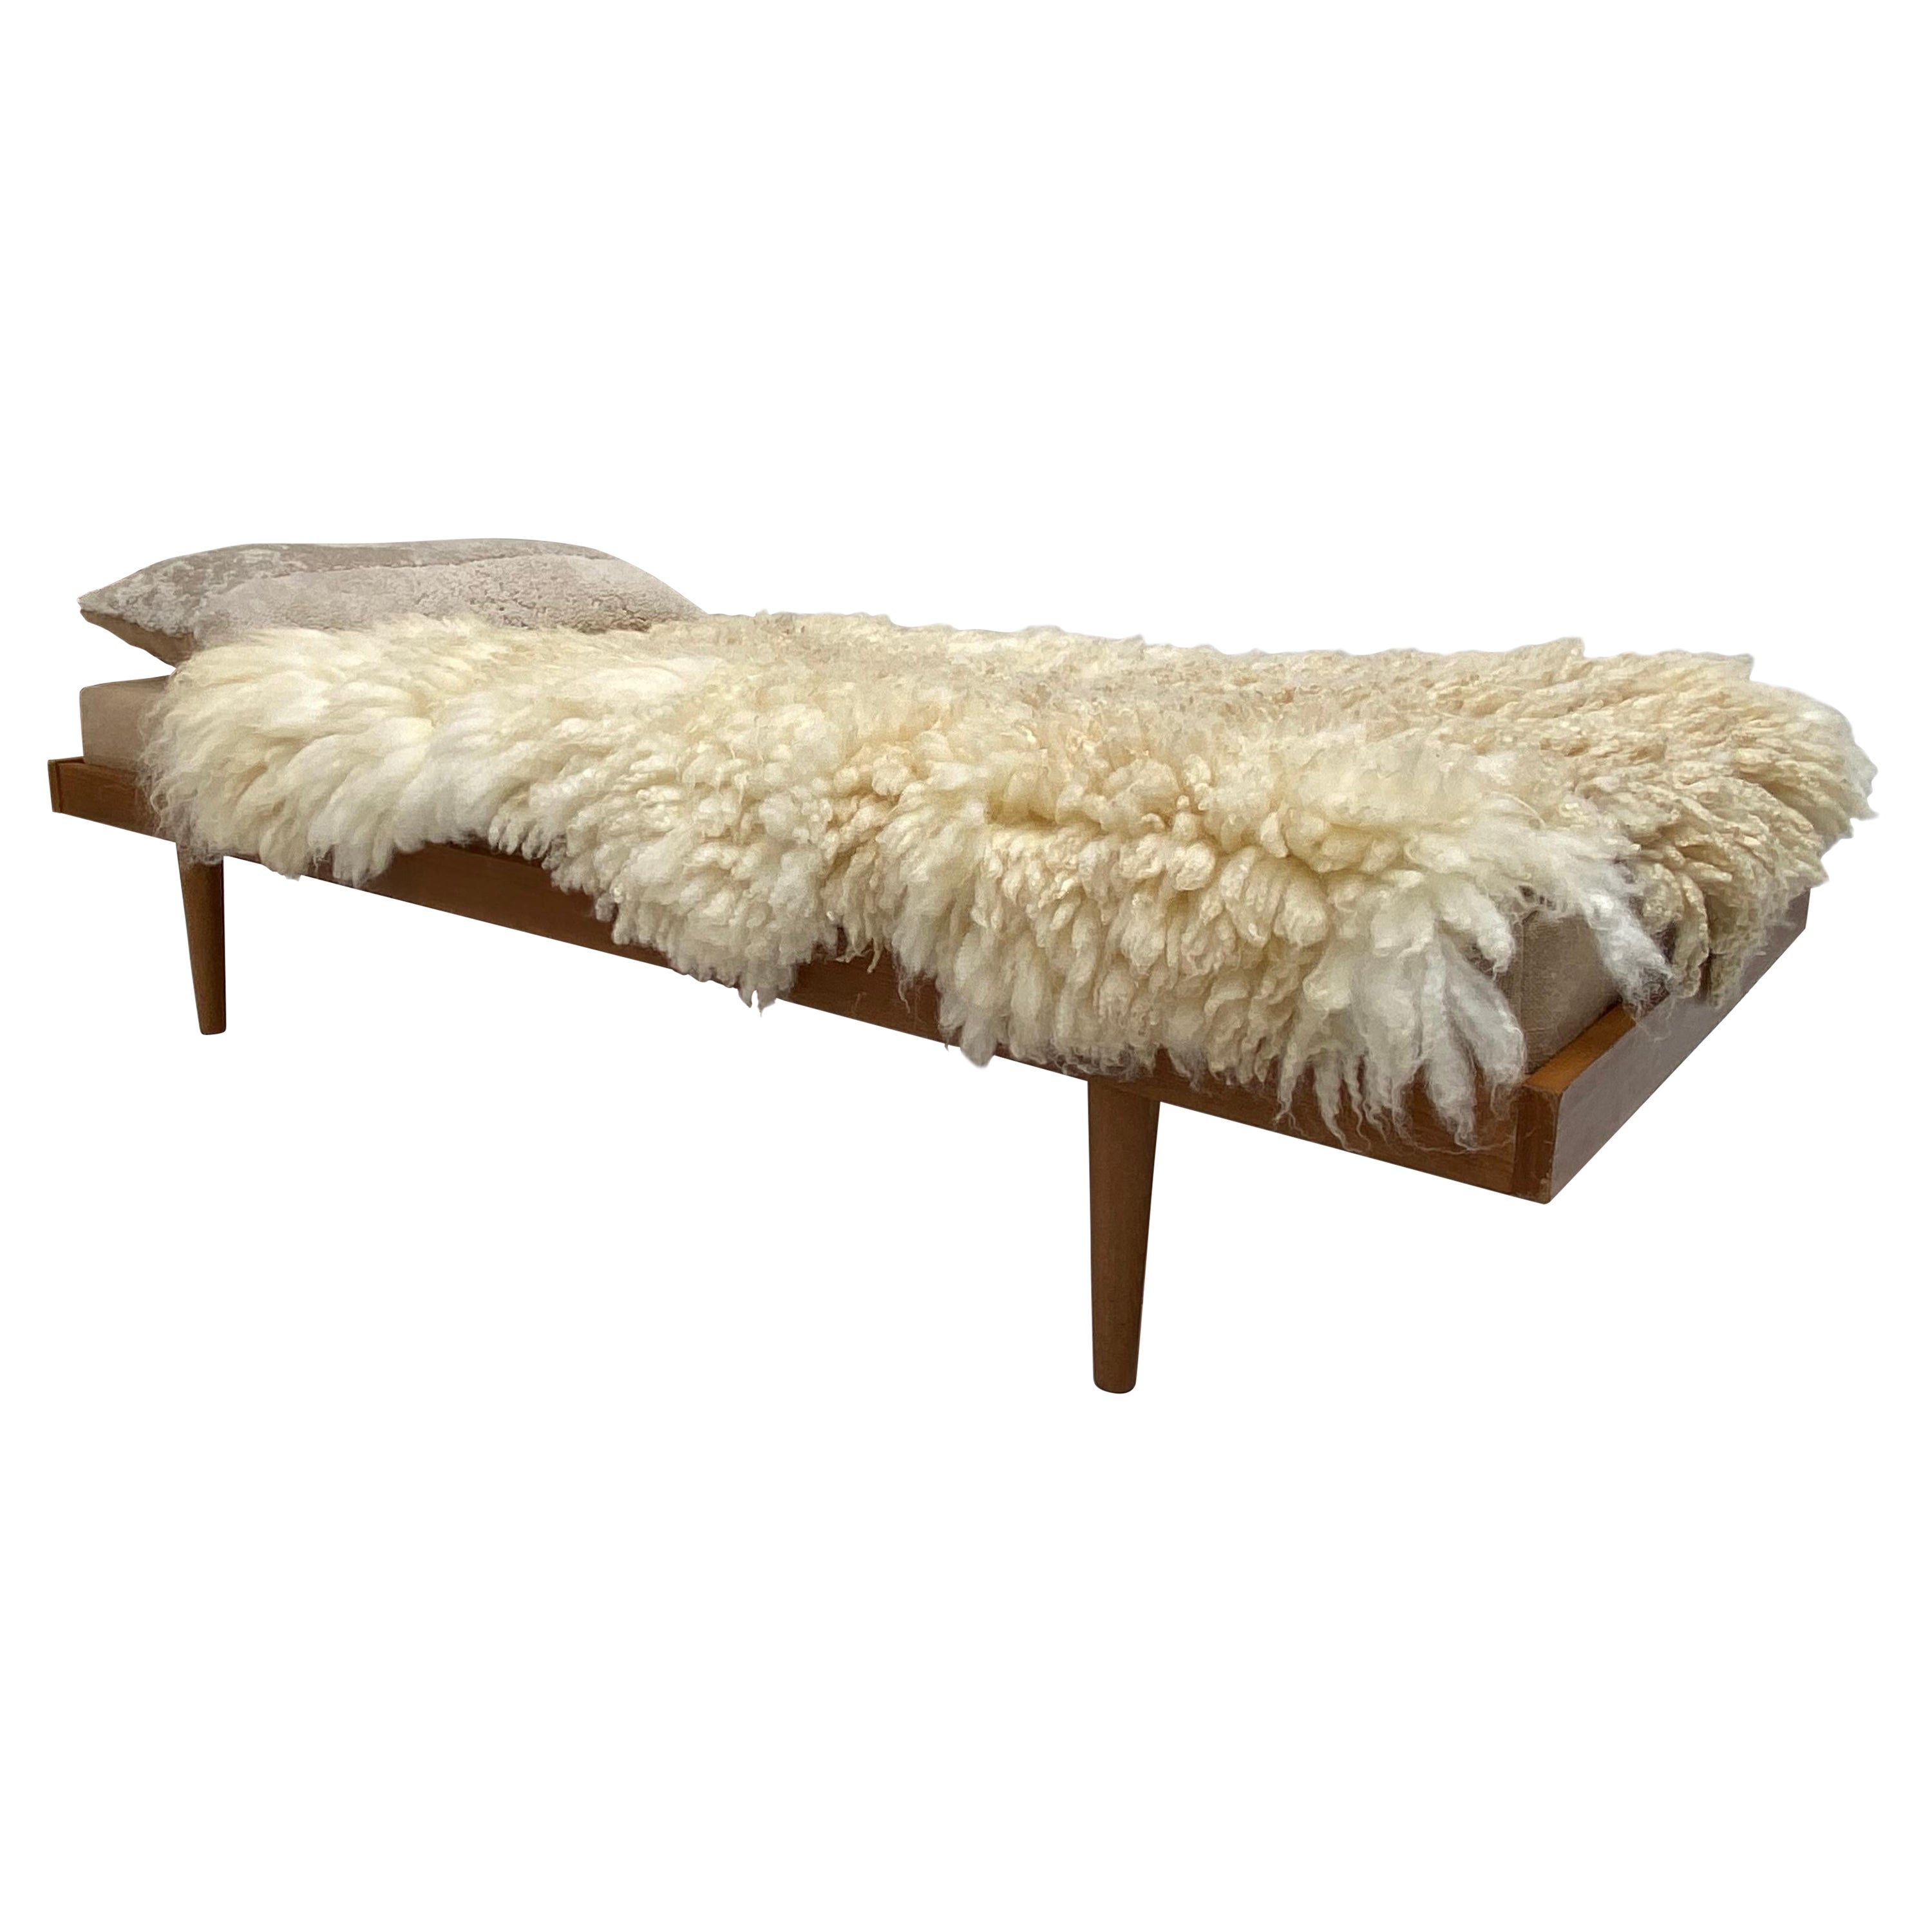 1950's Danish Teak Daybed with Felted Wensleydale Texel Sheep Wool & Raw Cotton